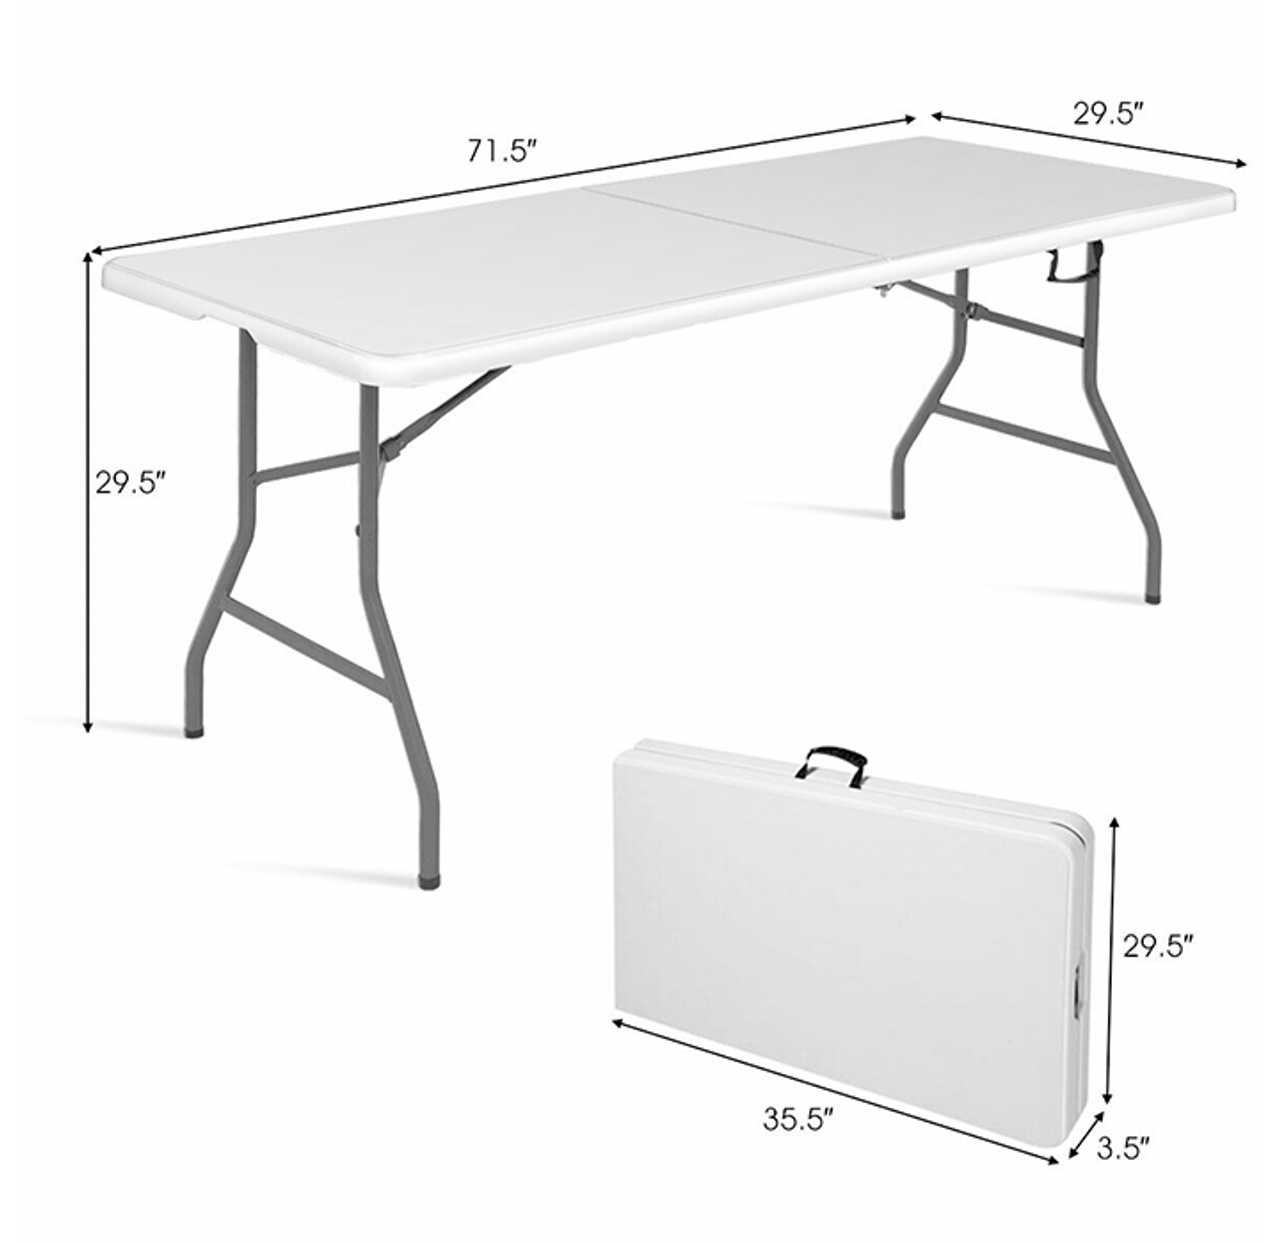 Portable 6-foot Folding Table product image